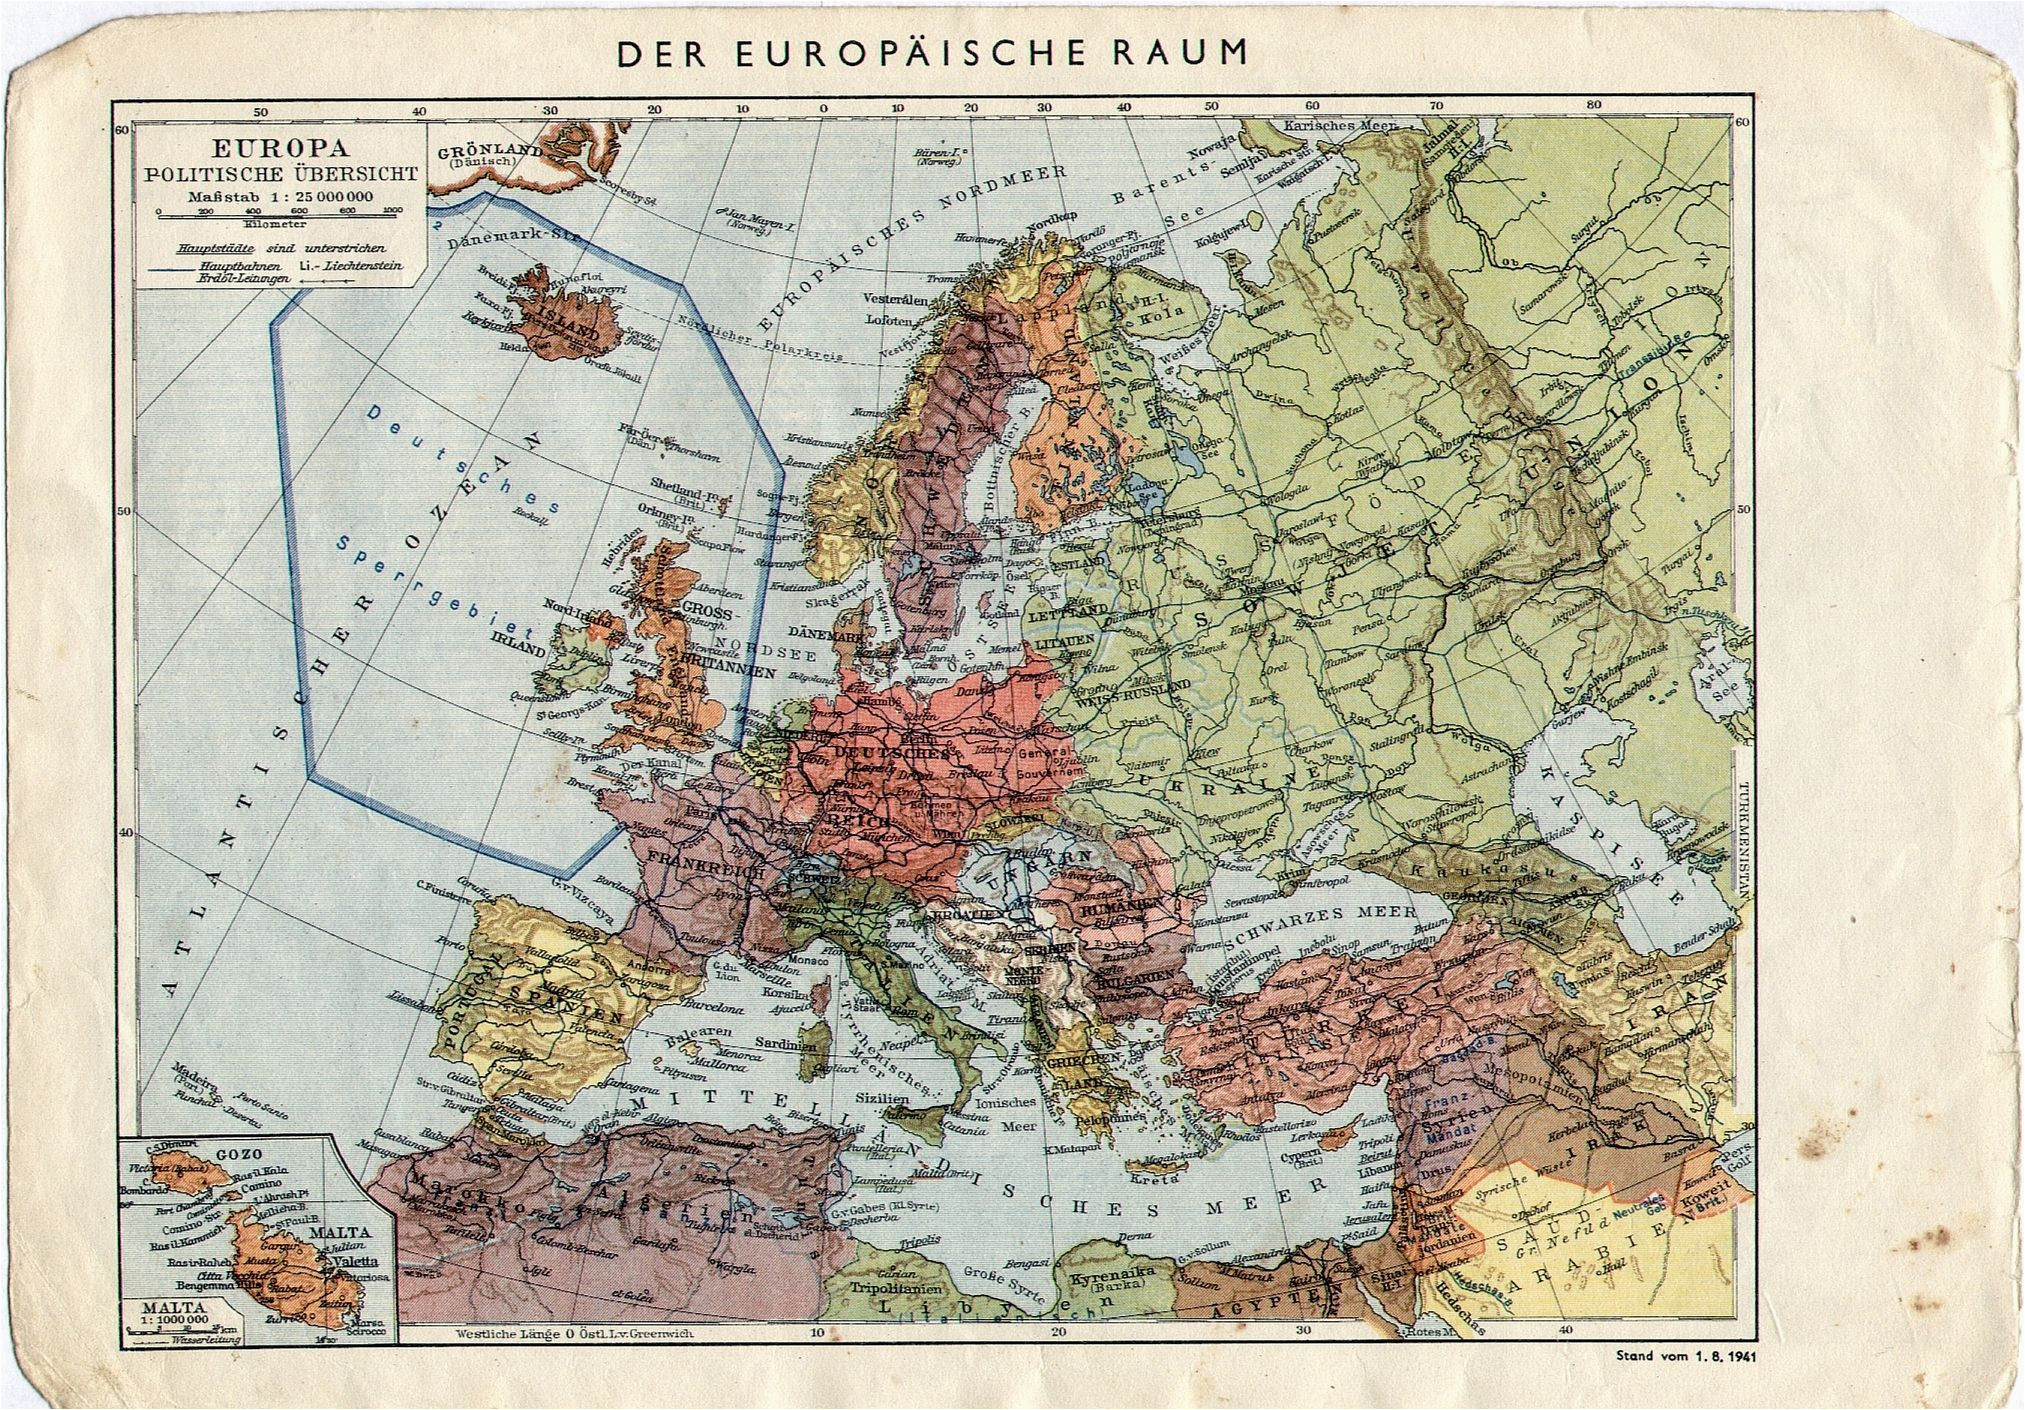 1941 german map of europe with a forbidden zone around uk